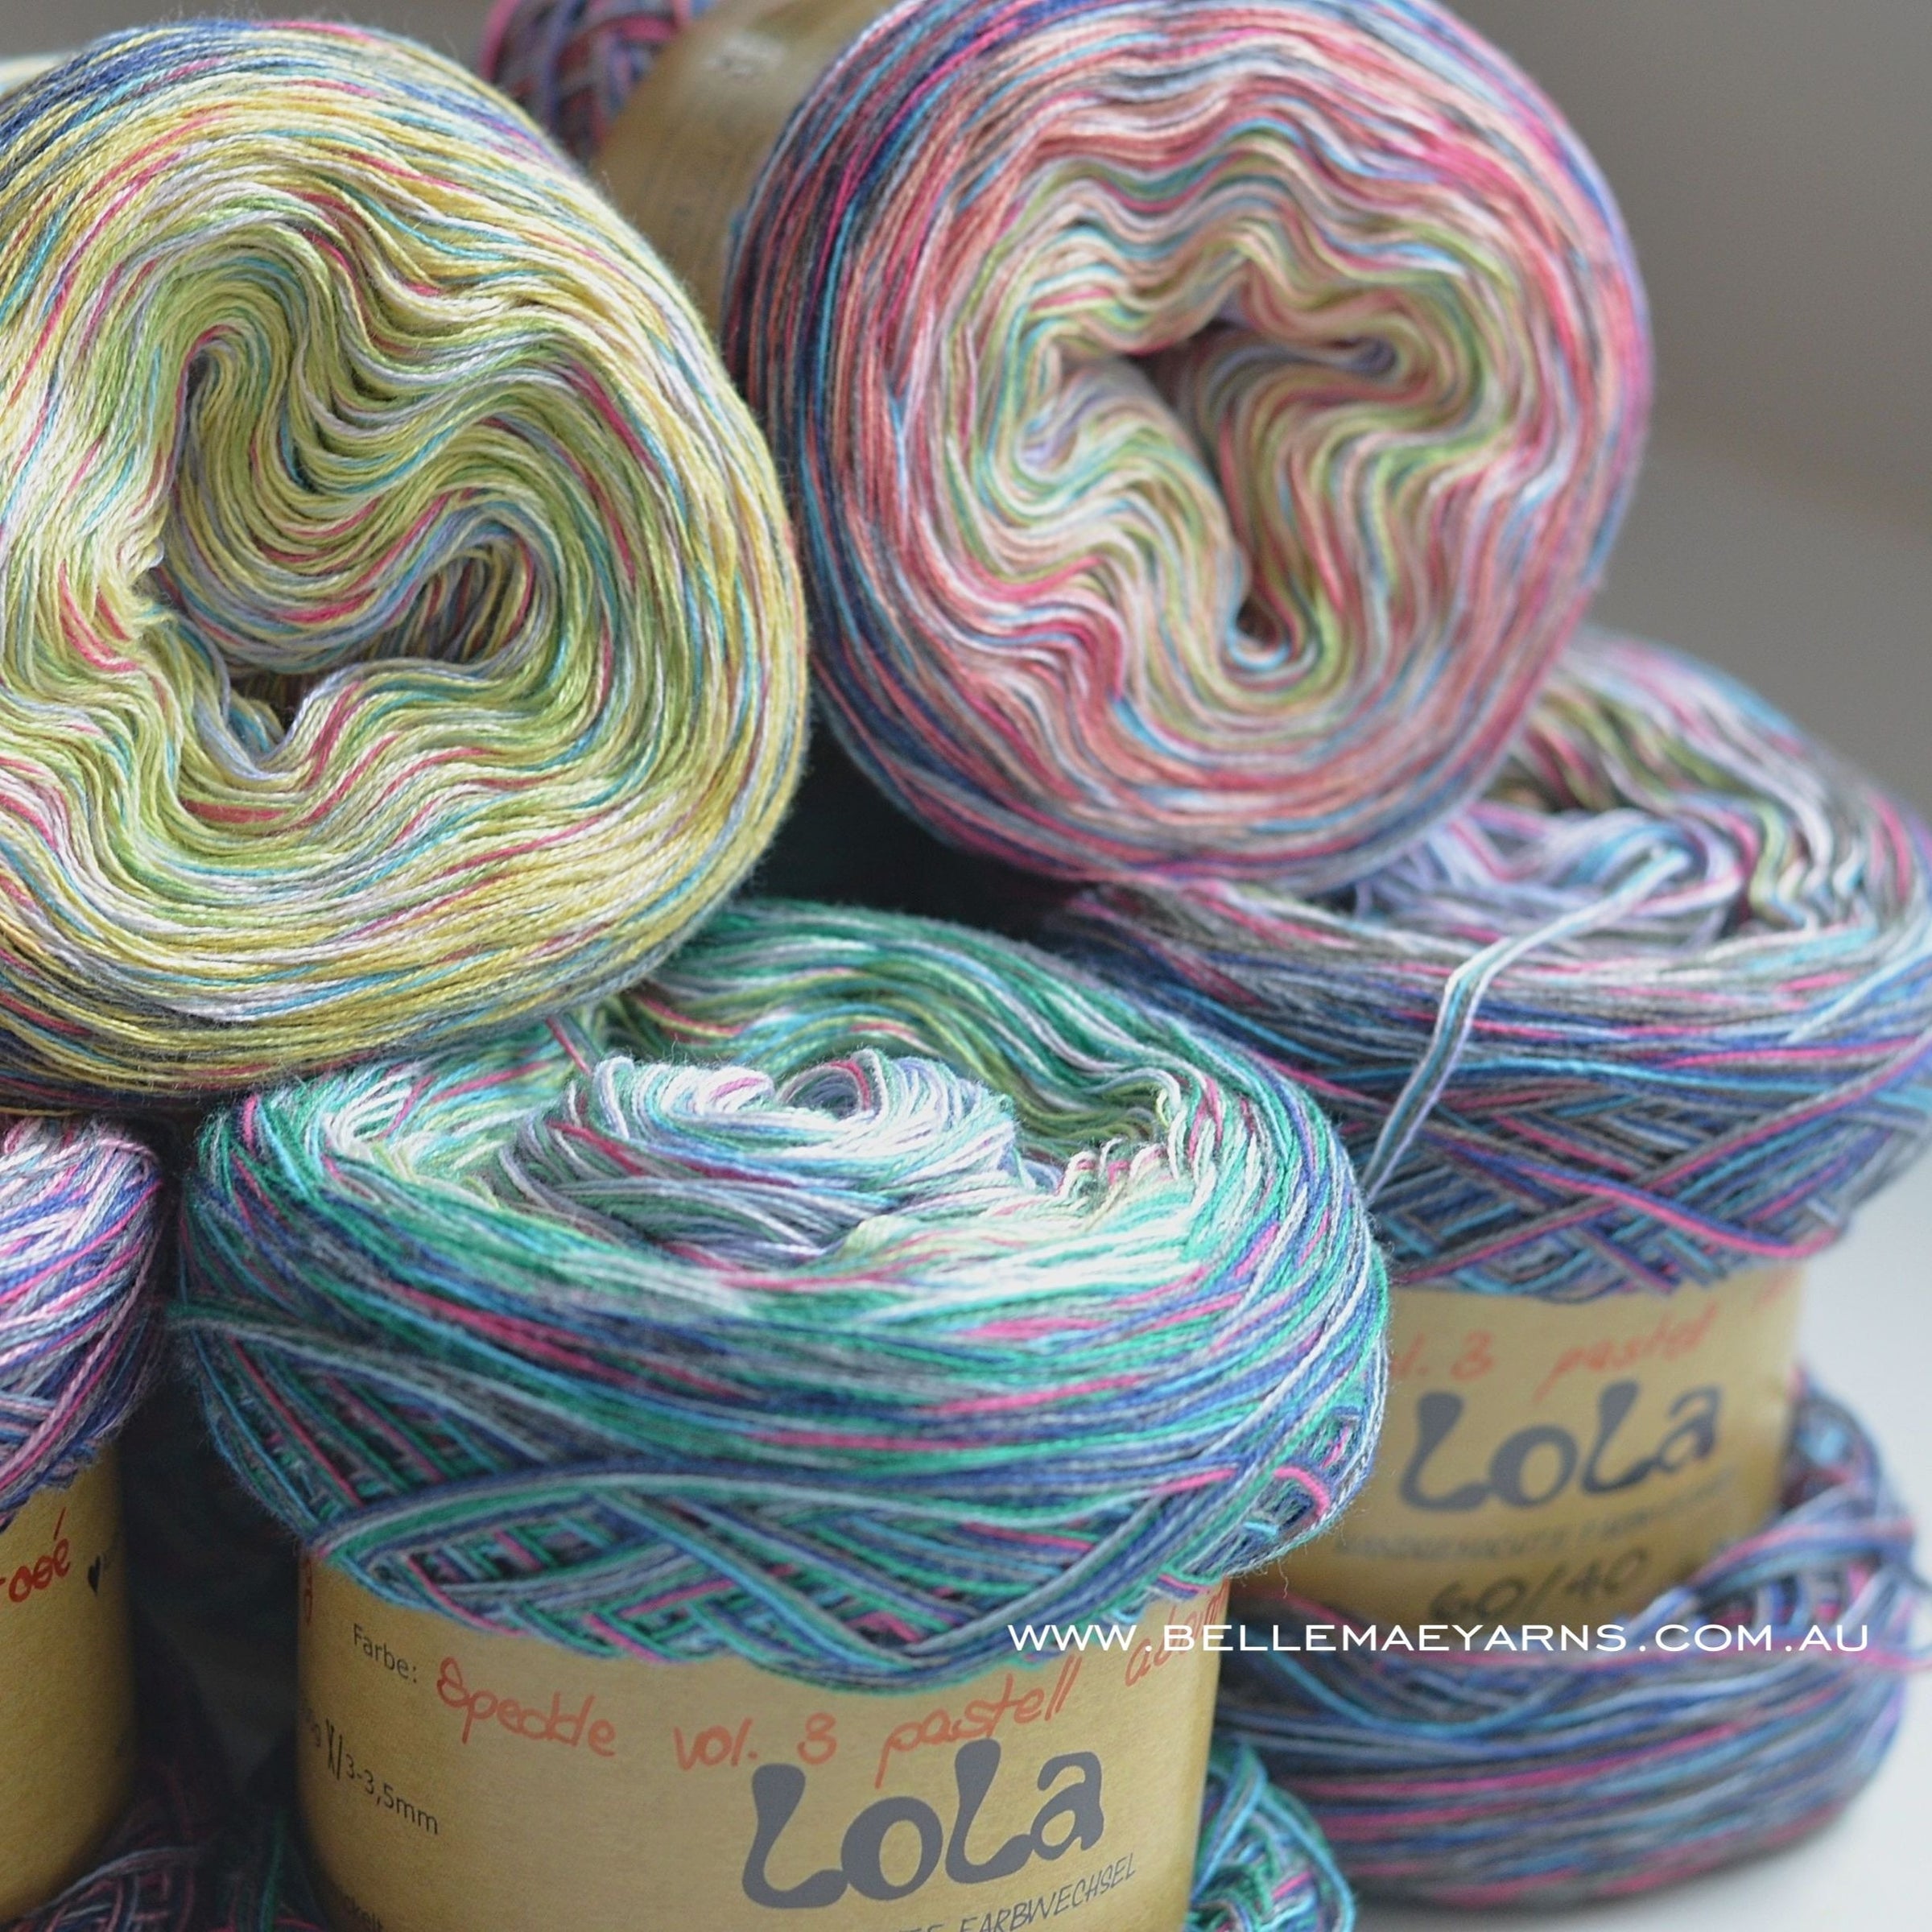 Lola Speckled 100gm